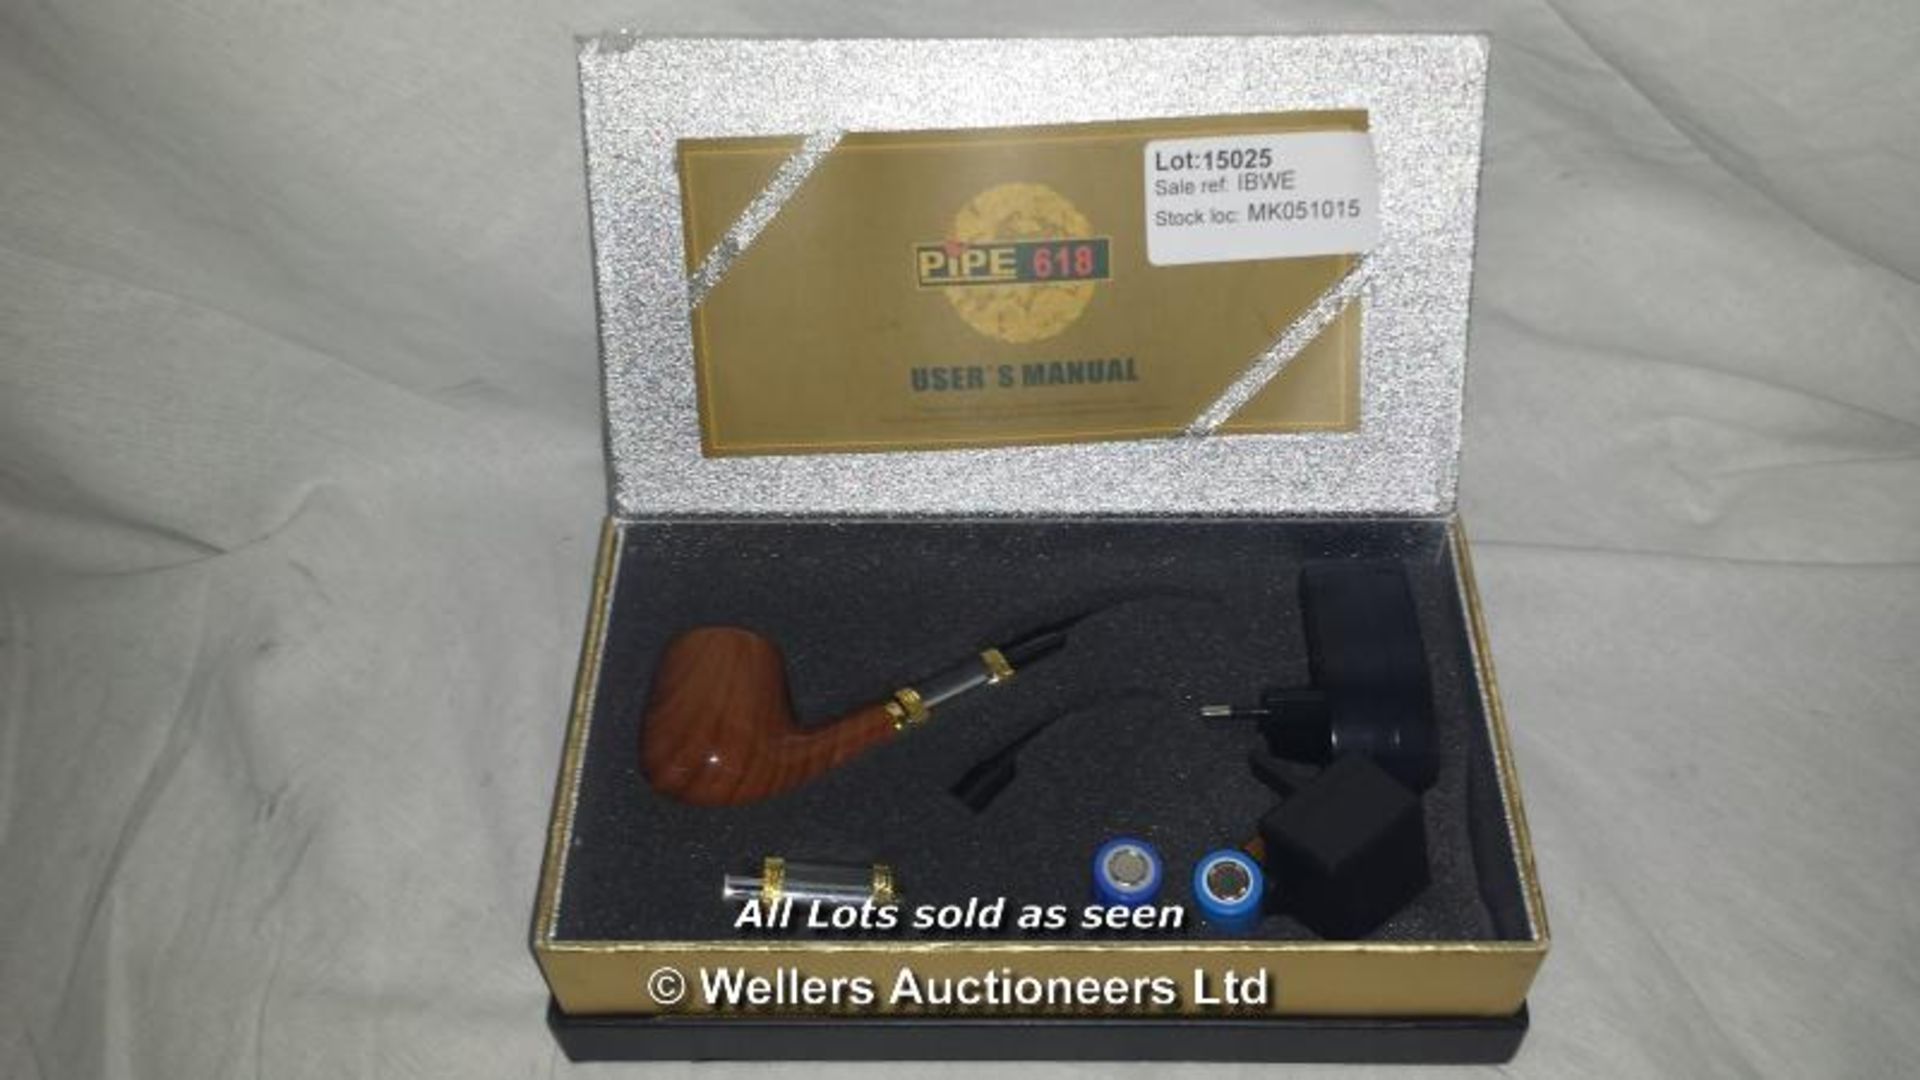 PIPE 618 OH E-PIPE (THIS LOT IS FOR DELIVERY ONLY) / GRADE: UNCLAIMED PROPERTY / BOXED (DC1) {